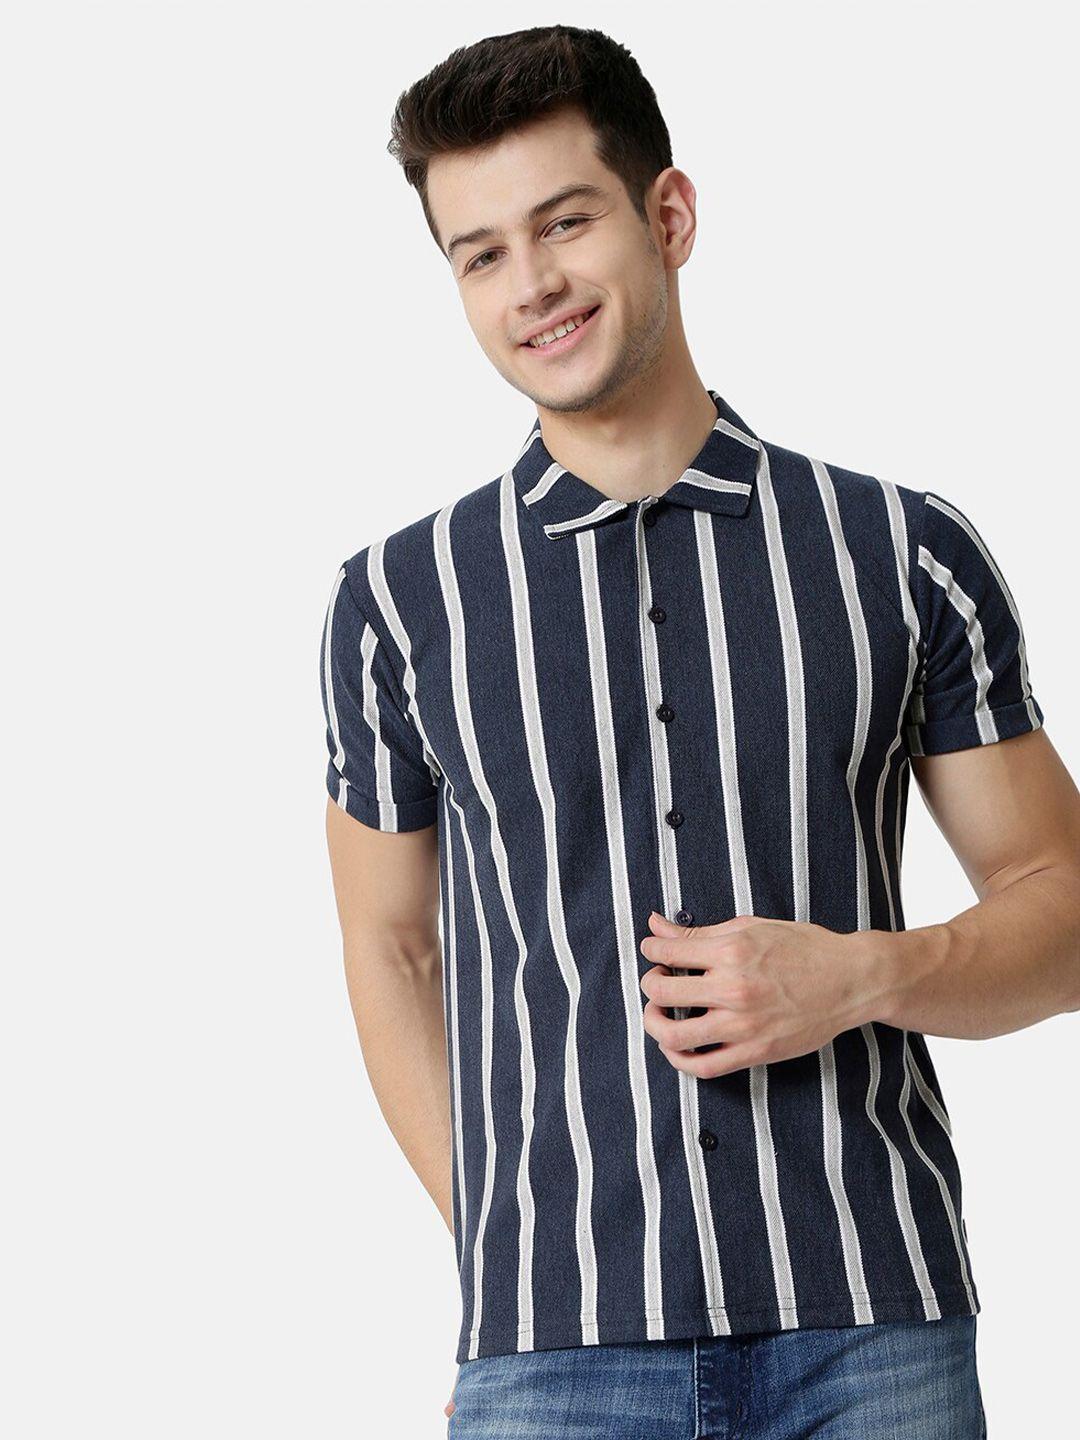 campus sutra men navy blue classic striped casual shirt